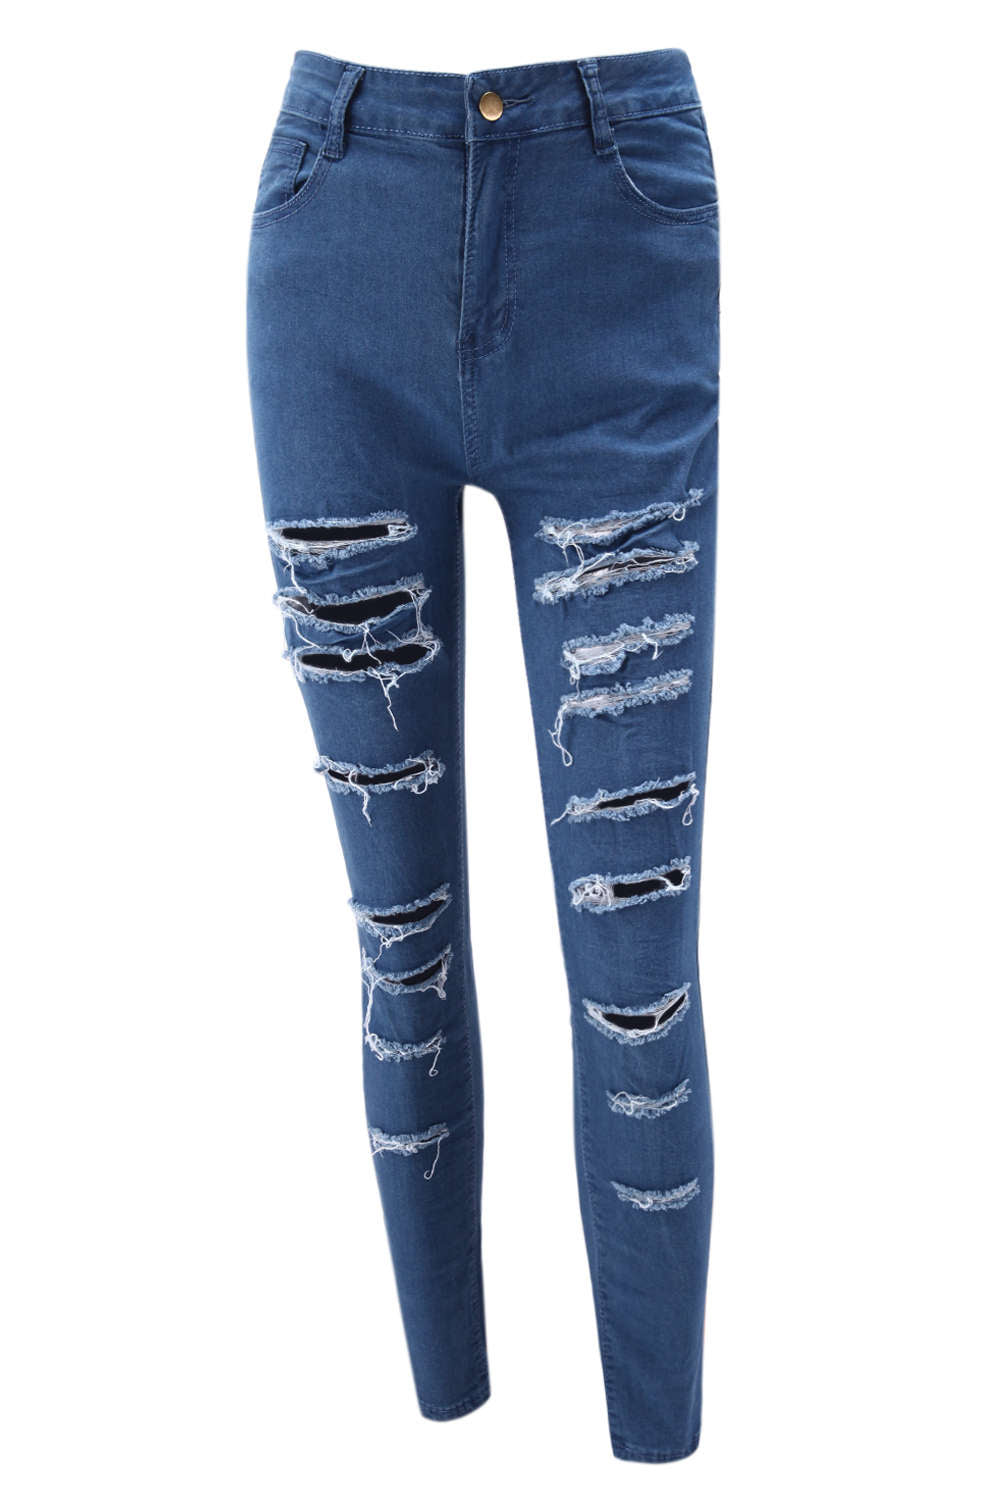 Iyasson Front Ripped Skinny Pencil Jeans Pants